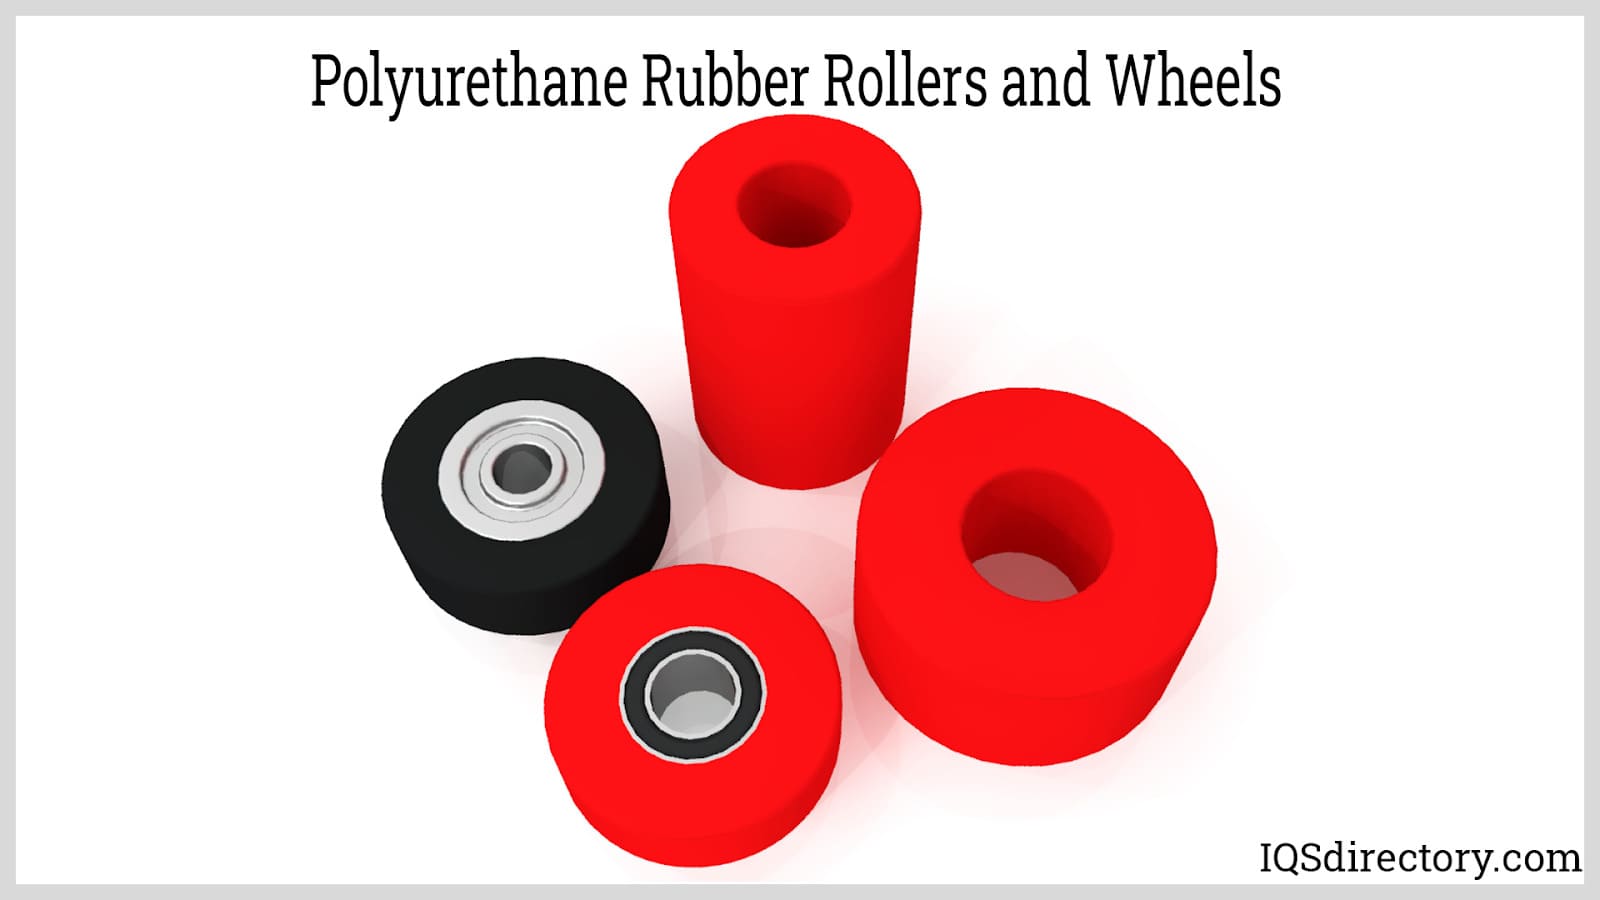 Polyurethane Rubber Rollers and Wheels